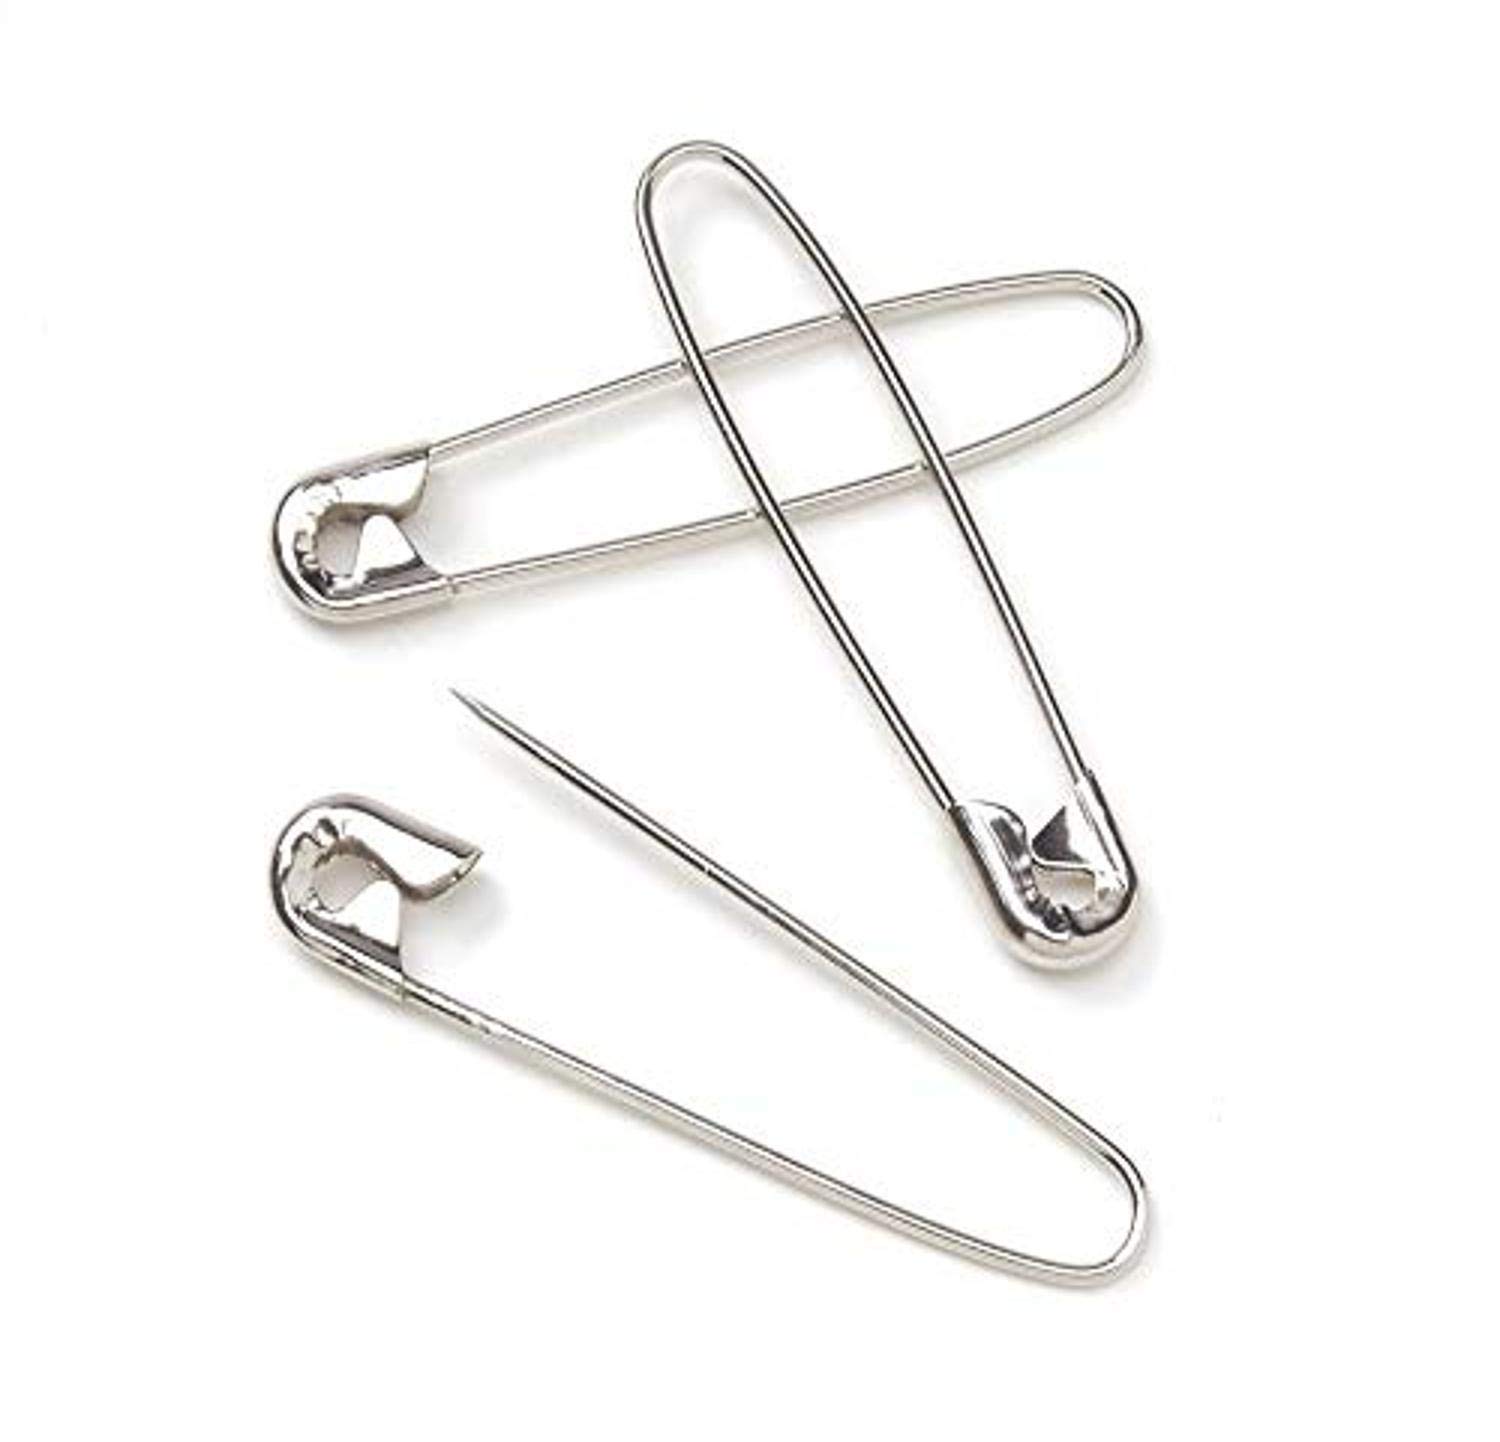 Safty Pin Steel 100'S - Soft product available at family pharmacy online buy now at qatar doha